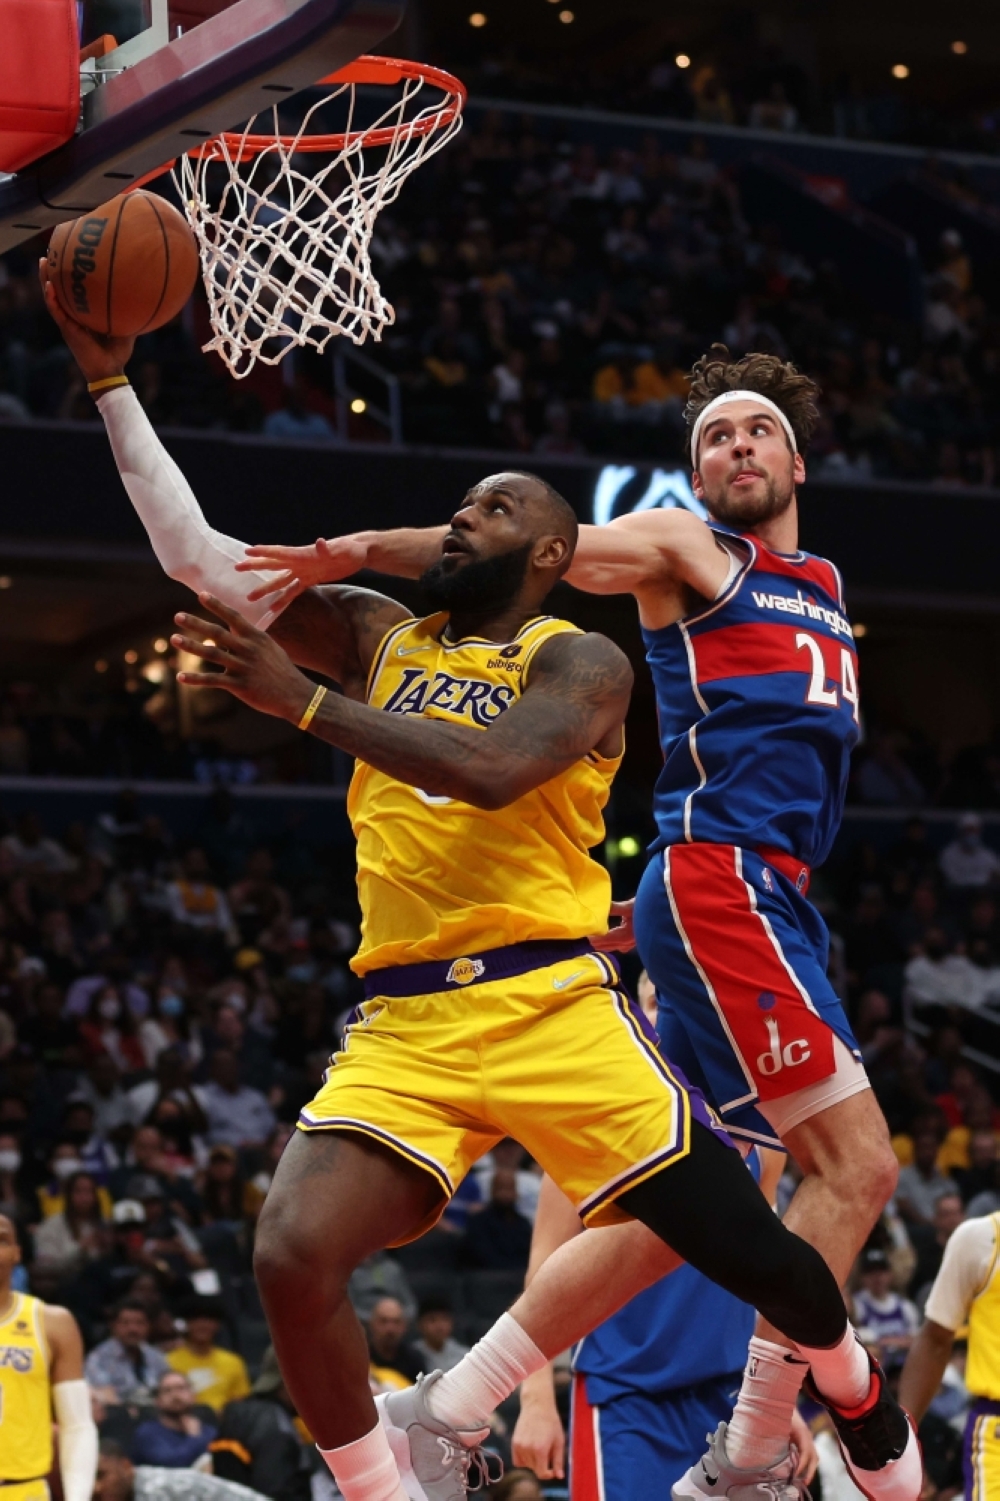 LeBron James of the Los Angeles Lakers gets past Corey Kispert of the Washington Wizards during the second half at Capital One Arena on Saturday, March 19, 2022 (March 20 in Manila) in Washington, DC. AFP PHOTO